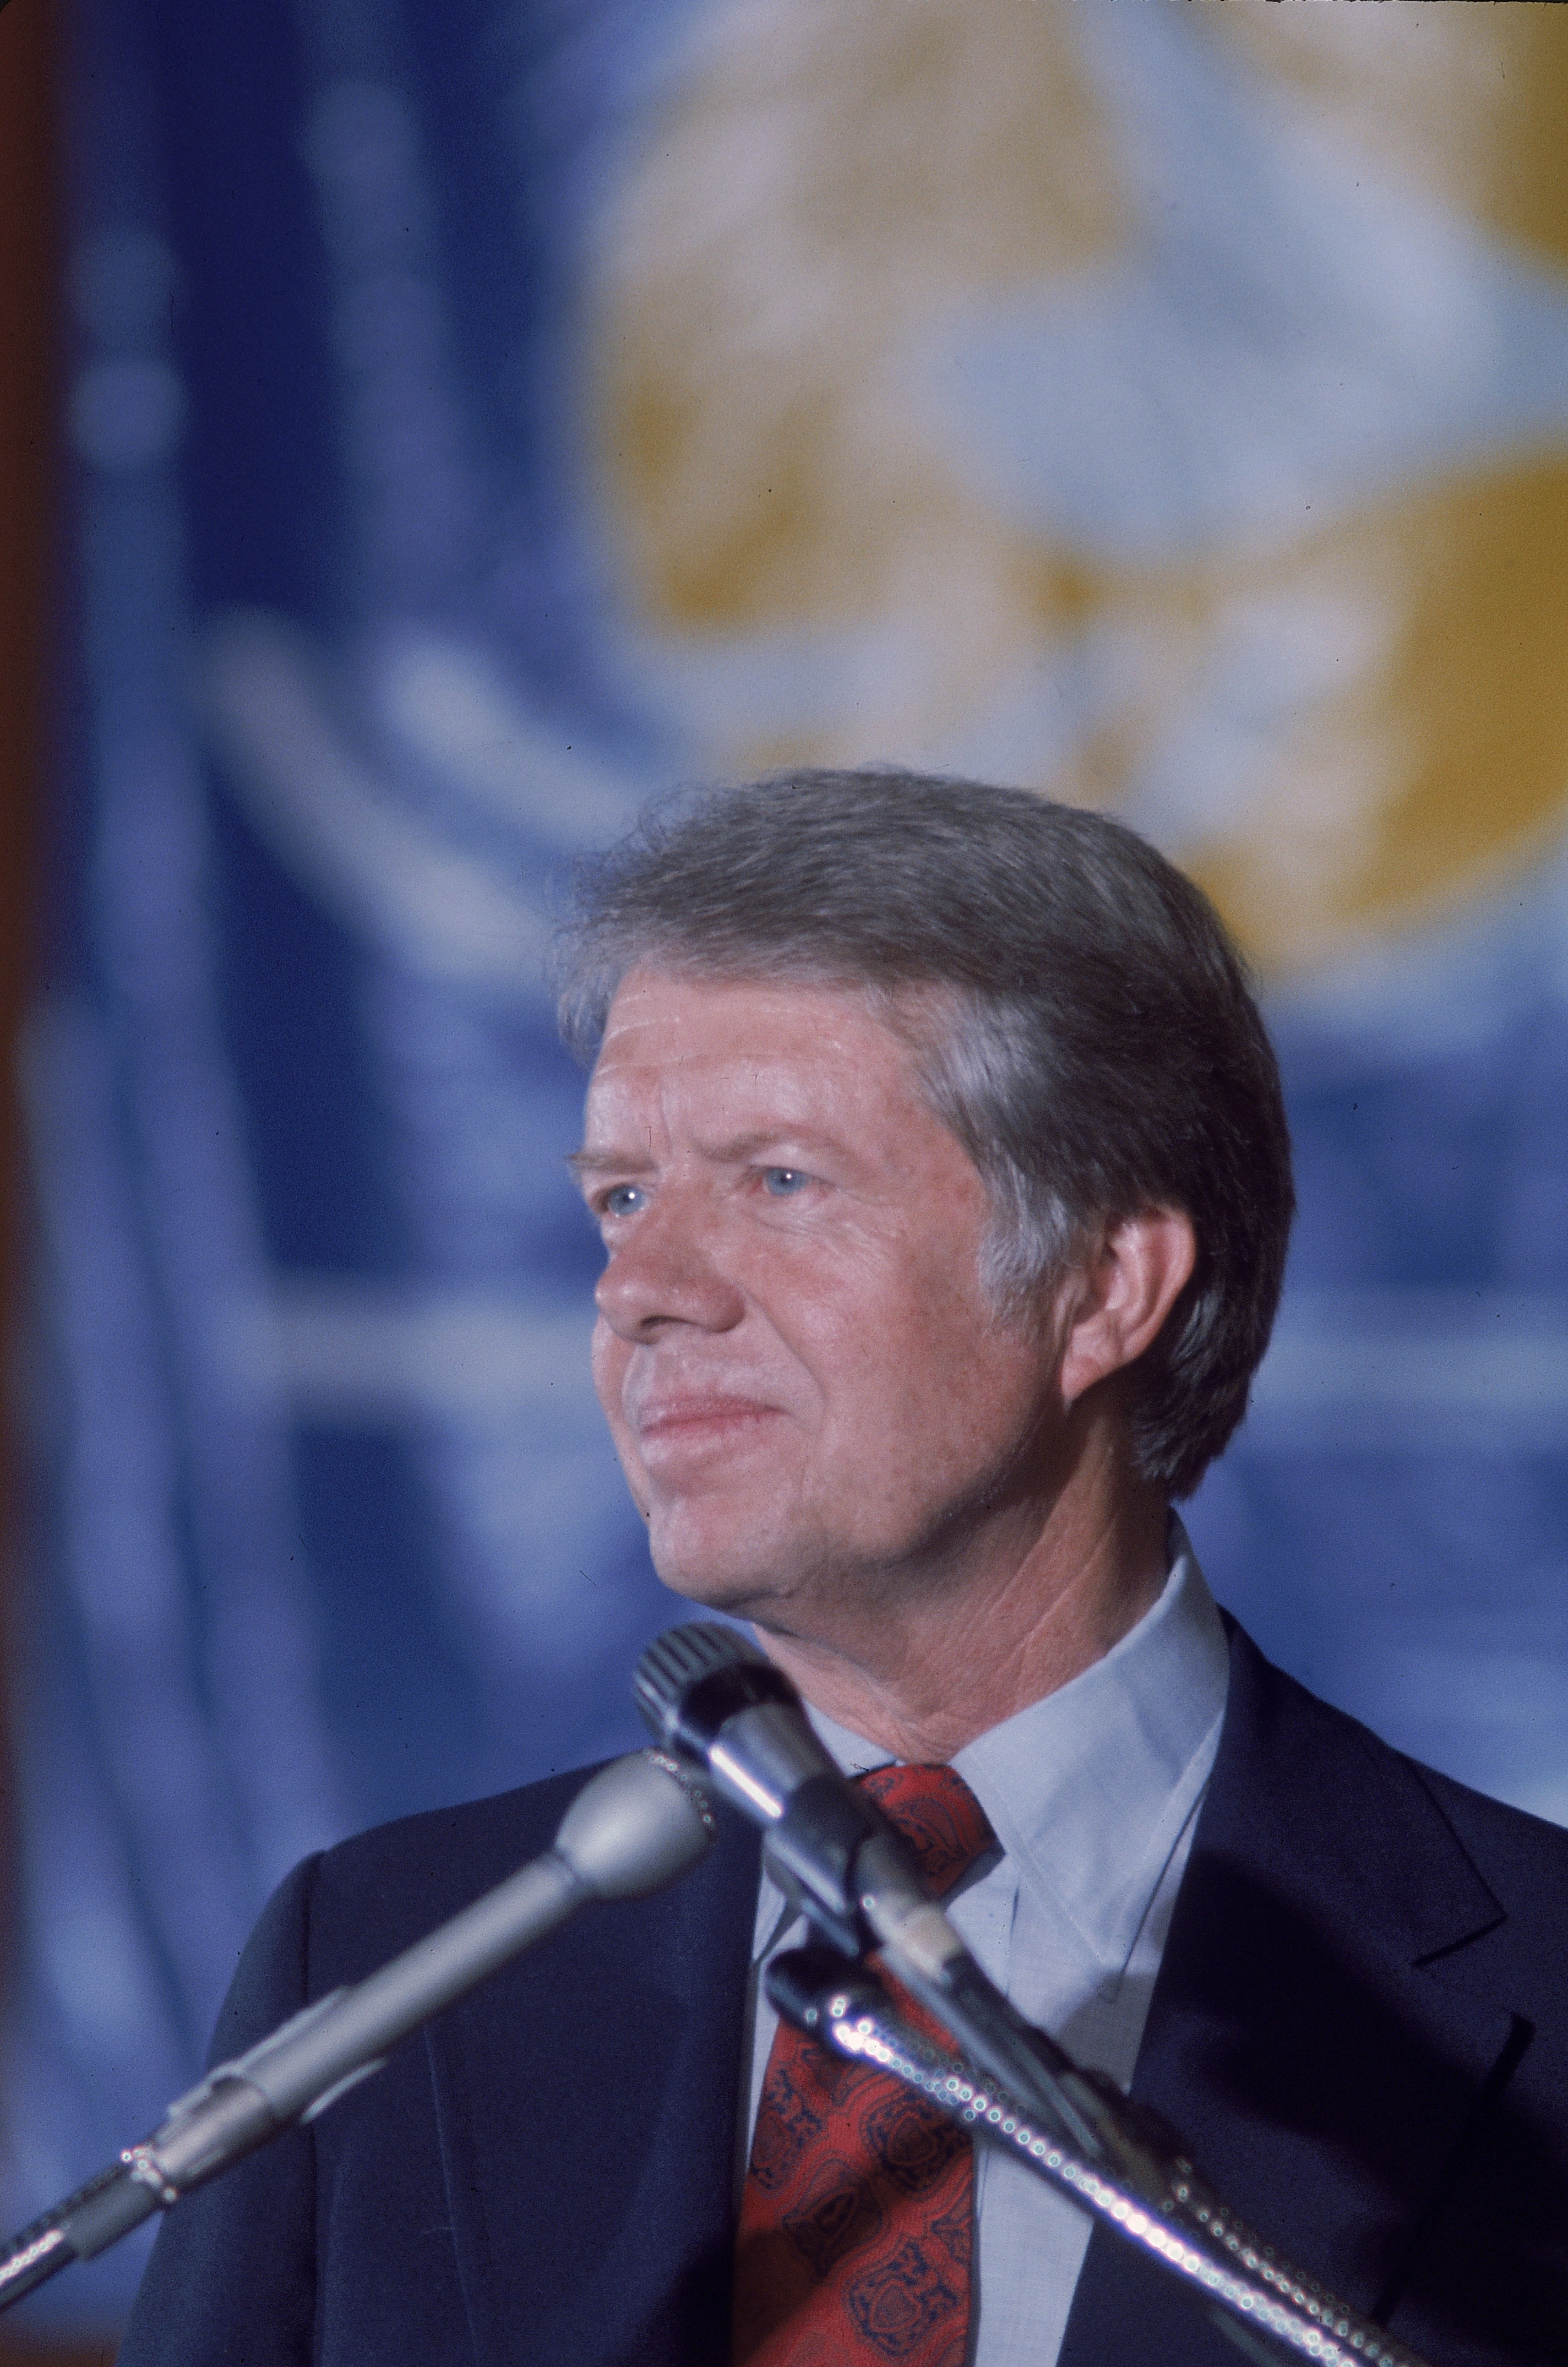 Former U.S. President Jimmy Carter speaking at a conference in New York on September 1, 1979 | Source: Getty Images